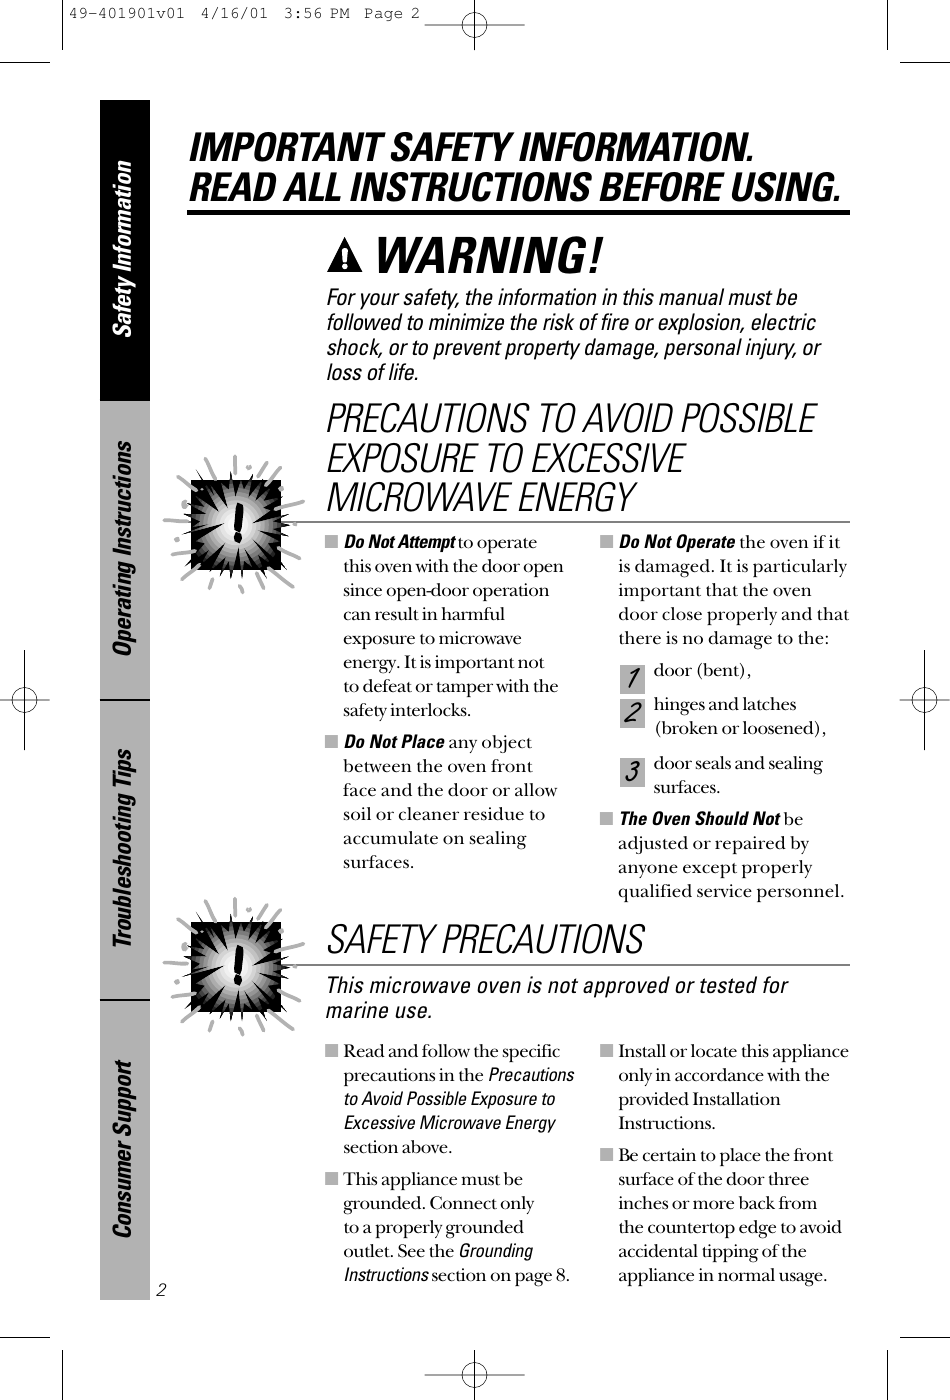 ■Read and follow the specificprecautions in the Precautionsto Avoid Possible Exposure toExcessive Microwave Energysection above.■This appliance must begrounded. Connect only to a properly groundedoutlet. See the GroundingInstructionssection on page 8.■Install or locate this applianceonly in accordance with theprovided InstallationInstructions.■Be certain to place the frontsurface of the door threeinches or more back from the countertop edge to avoidaccidental tipping of theappliance in normal usage.■Do Not Attemptto operate this oven with the door opensince open-door operationcan result in harmfulexposure to microwaveenergy. It is important not to defeat or tamper with thesafety interlocks.■Do Not Place any objectbetween the oven front face and the door or allowsoil or cleaner residue toaccumulate on sealingsurfaces.■Do Not Operate the oven if itis damaged. It is particularlyimportant that the ovendoor close properly and thatthere is no damage to the:door (bent),hinges and latches (broken or loosened),door seals and sealingsurfaces.■The Oven Should Not beadjusted or repaired byanyone except properlyqualified service personnel.321PRECAUTIONS TO AVOID POSSIBLEEXPOSURE TO EXCESSIVEMICROWAVE ENERGYSafety InformationOperating InstructionsTroubleshooting TipsConsumer SupportIMPORTANT SAFETY INFORMATION.READ ALL INSTRUCTIONS BEFORE USING.2For your safety, the information in this manual must befollowed to minimize the risk of fire or explosion, electricshock, or to prevent property damage, personal injury, or loss of life.WARNING! This microwave oven is not approved or tested formarine use.SAFETY PRECAUTIONS49-401901v01  4/16/01  3:56 PM  Page 2